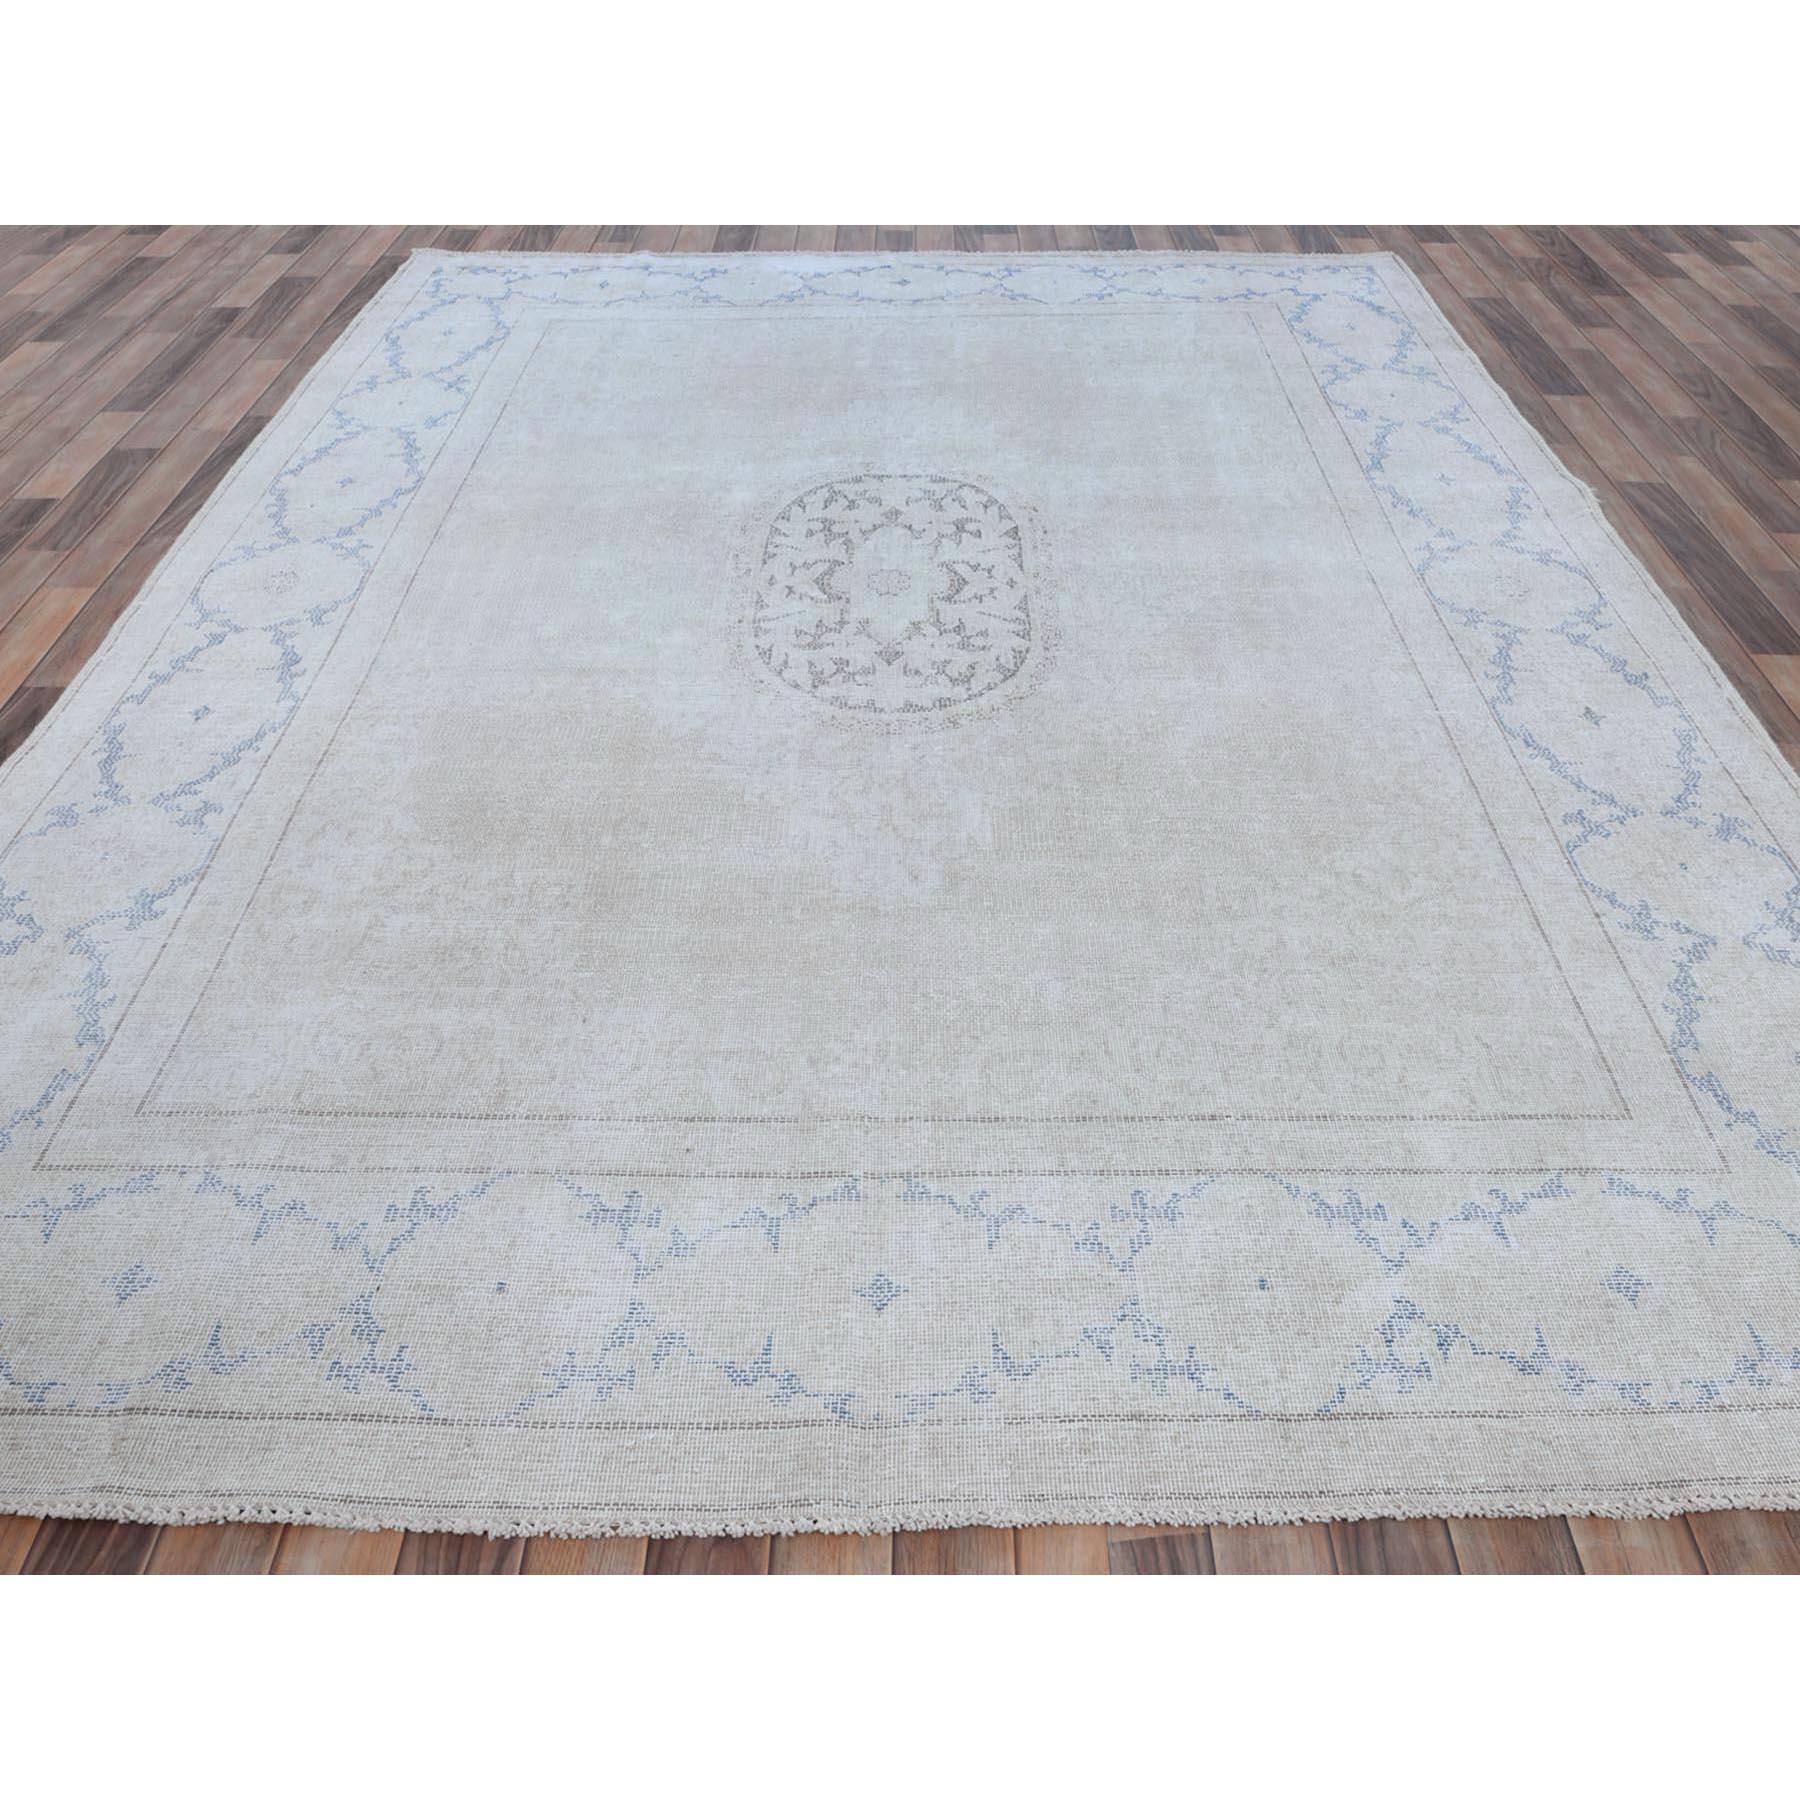 Medieval Beige Old Persian Kerman Shabby Chic Distressed Hand Knotted Worn Wool Rug For Sale